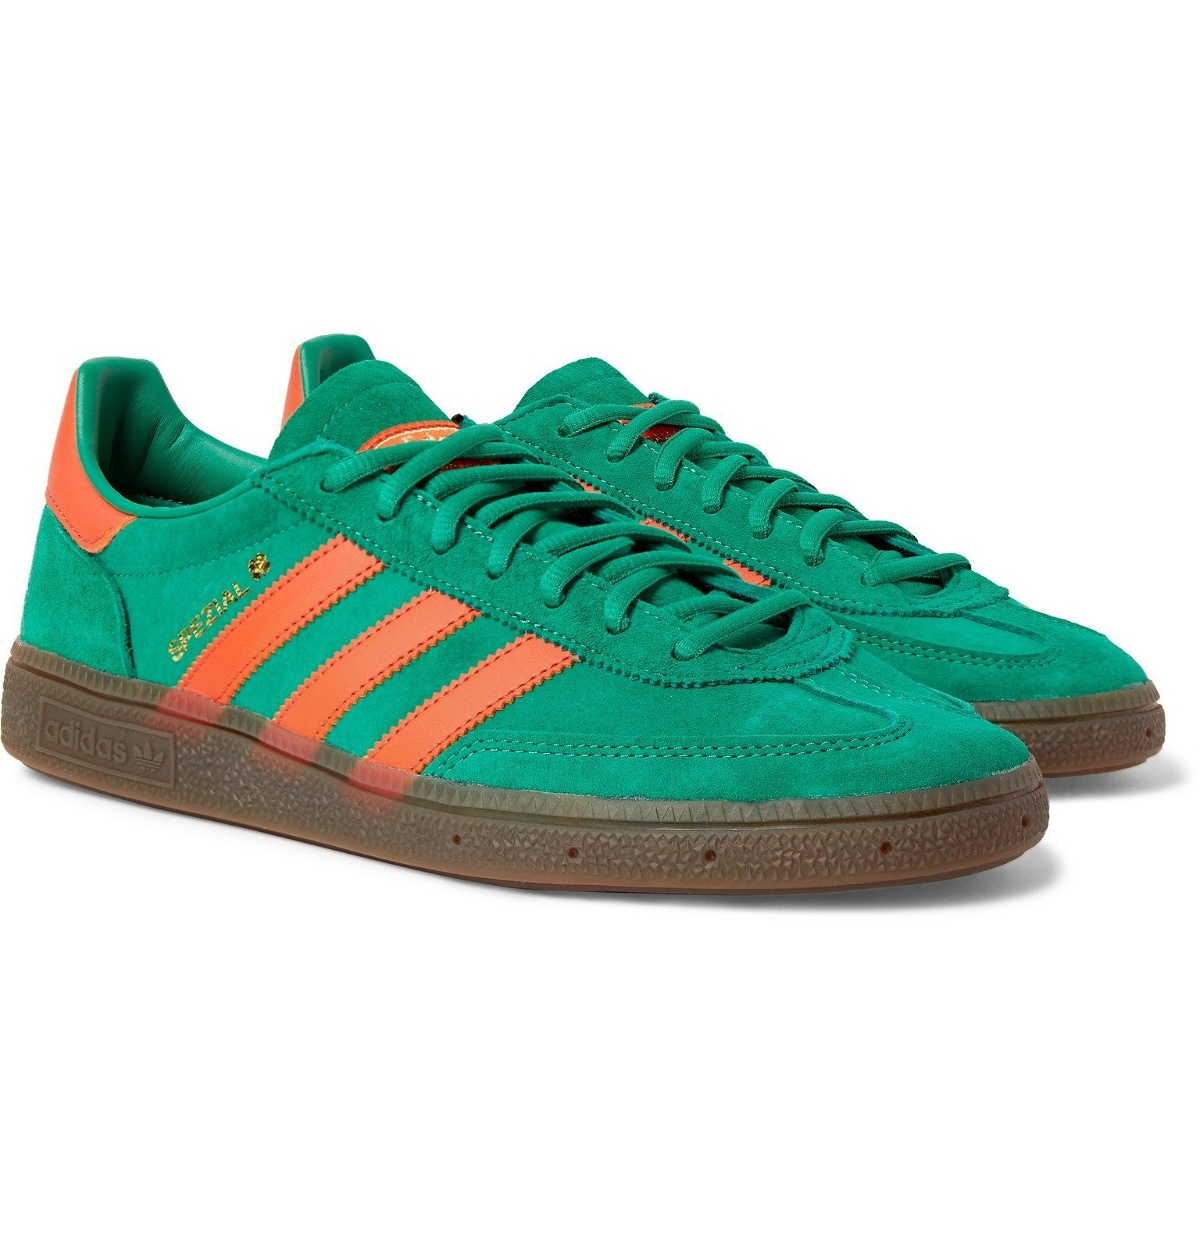 adidas - Handball Spezial Leather-Trimmed Sneakers - Green adidas